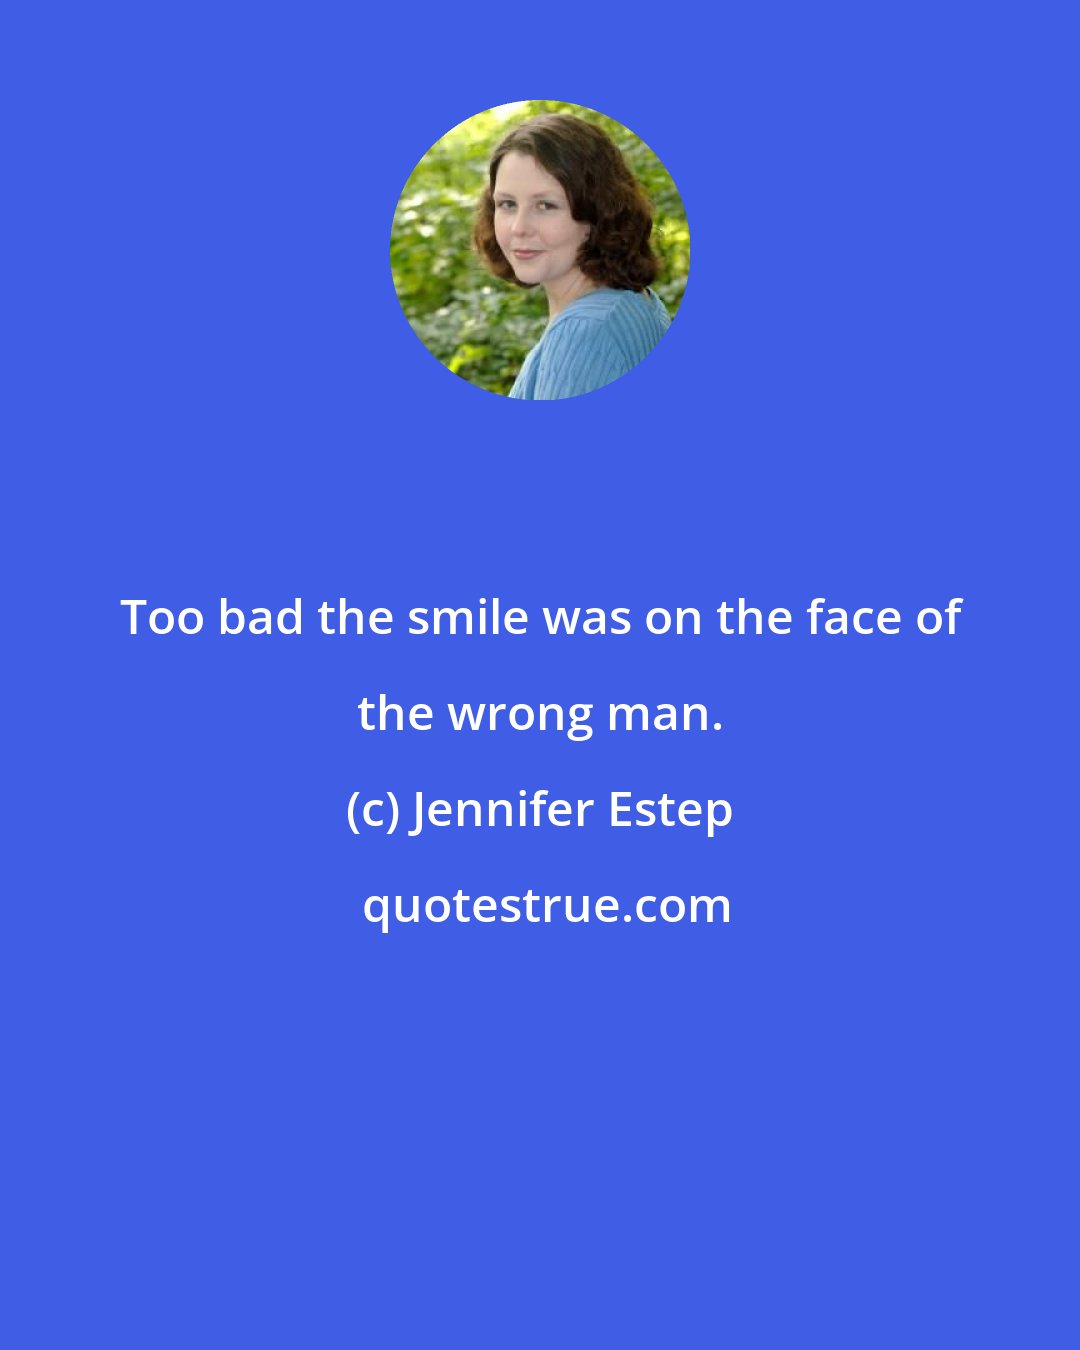 Jennifer Estep: Too bad the smile was on the face of the wrong man.